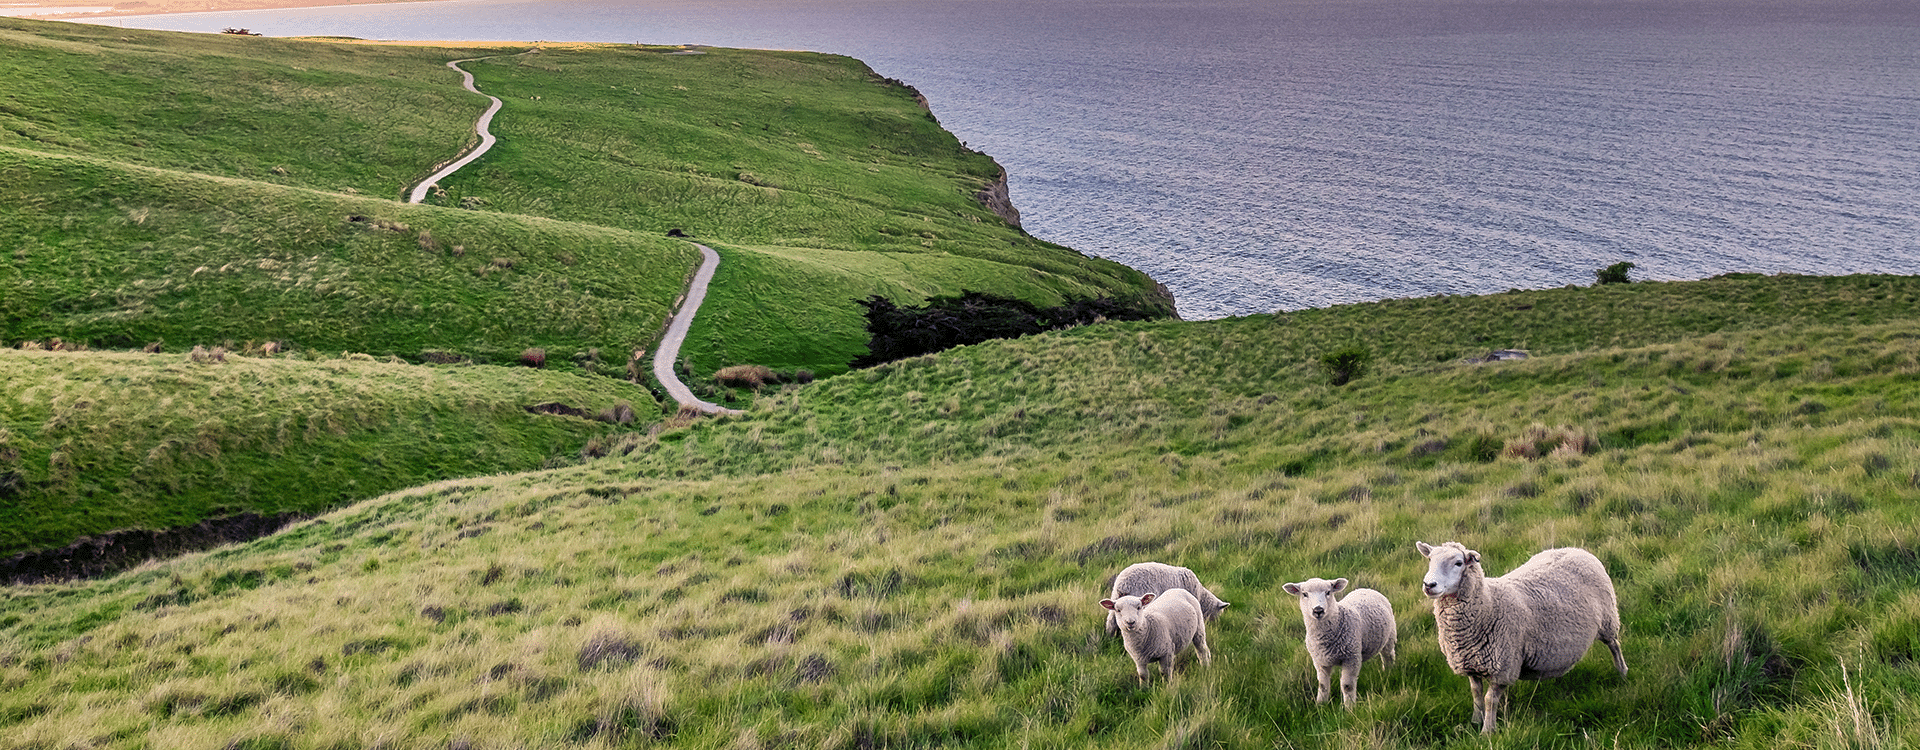 New Zealand coastal landscape, four sheep stand by a walking track